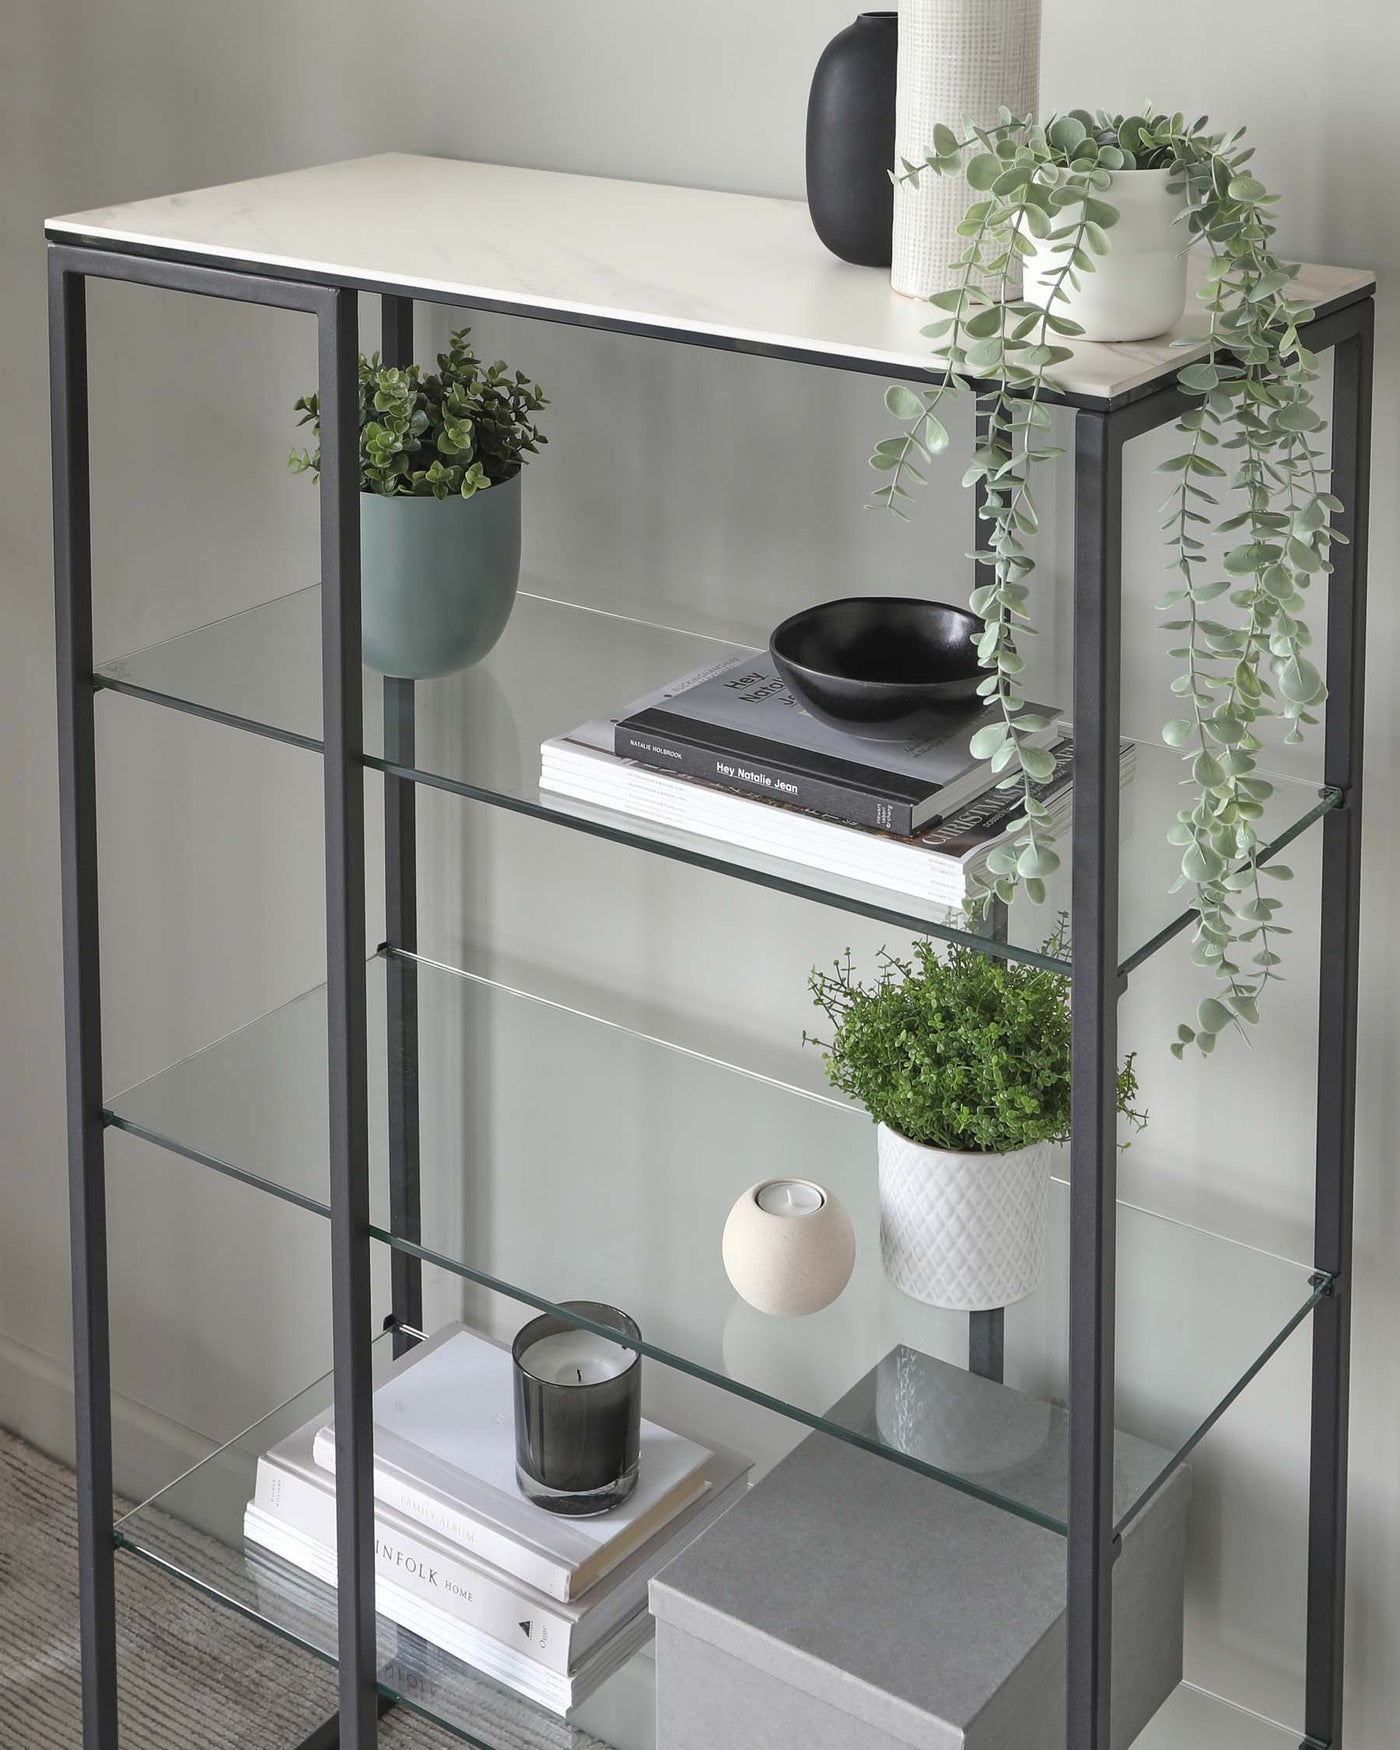 A contemporary, black metal frame bookshelf with four tiers featuring marble-like white laminate tops and clear glass shelves. Decorative items including plants, books, and vases are arranged on the shelves for display purposes.